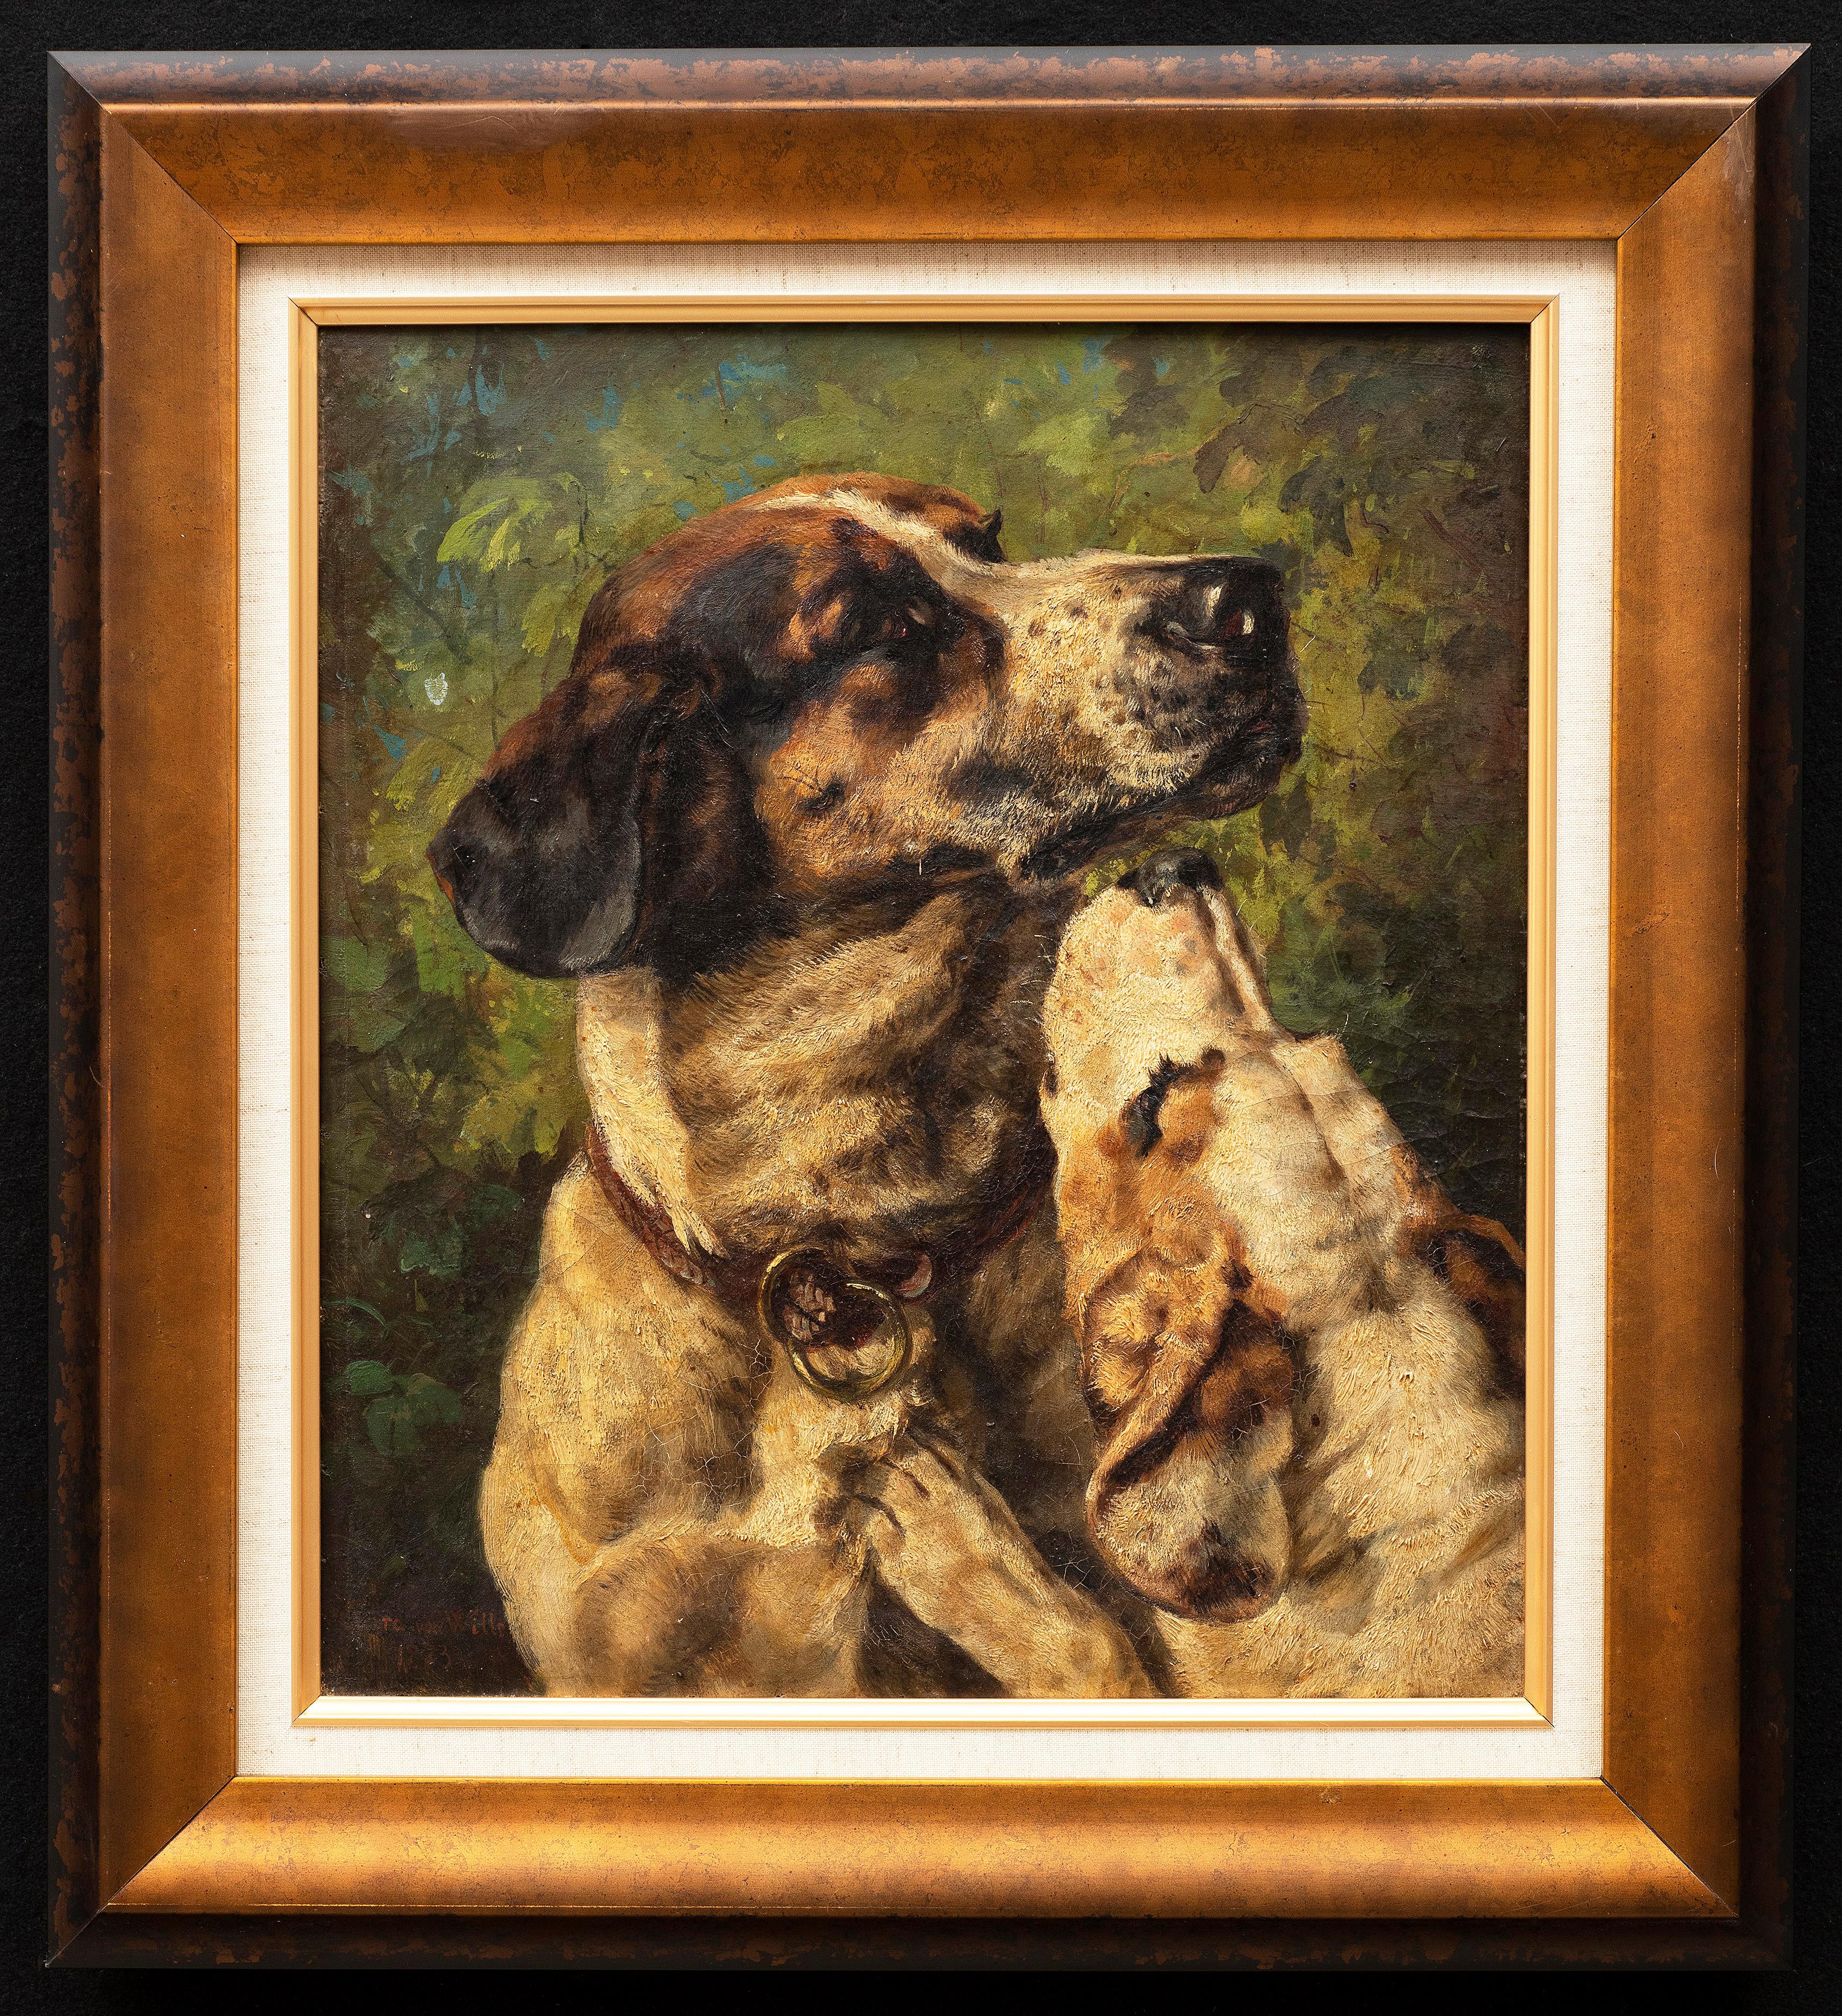 "Portrait of Two Dogs", 1873
Clara von Wille (German, 1838-1883)
Oil on canvas
Signed and dated lower left
17.88" x 15.5"

The following was translated from German:

Clara von Wille (German, 1838-1883) was the last of four daughters of the royal